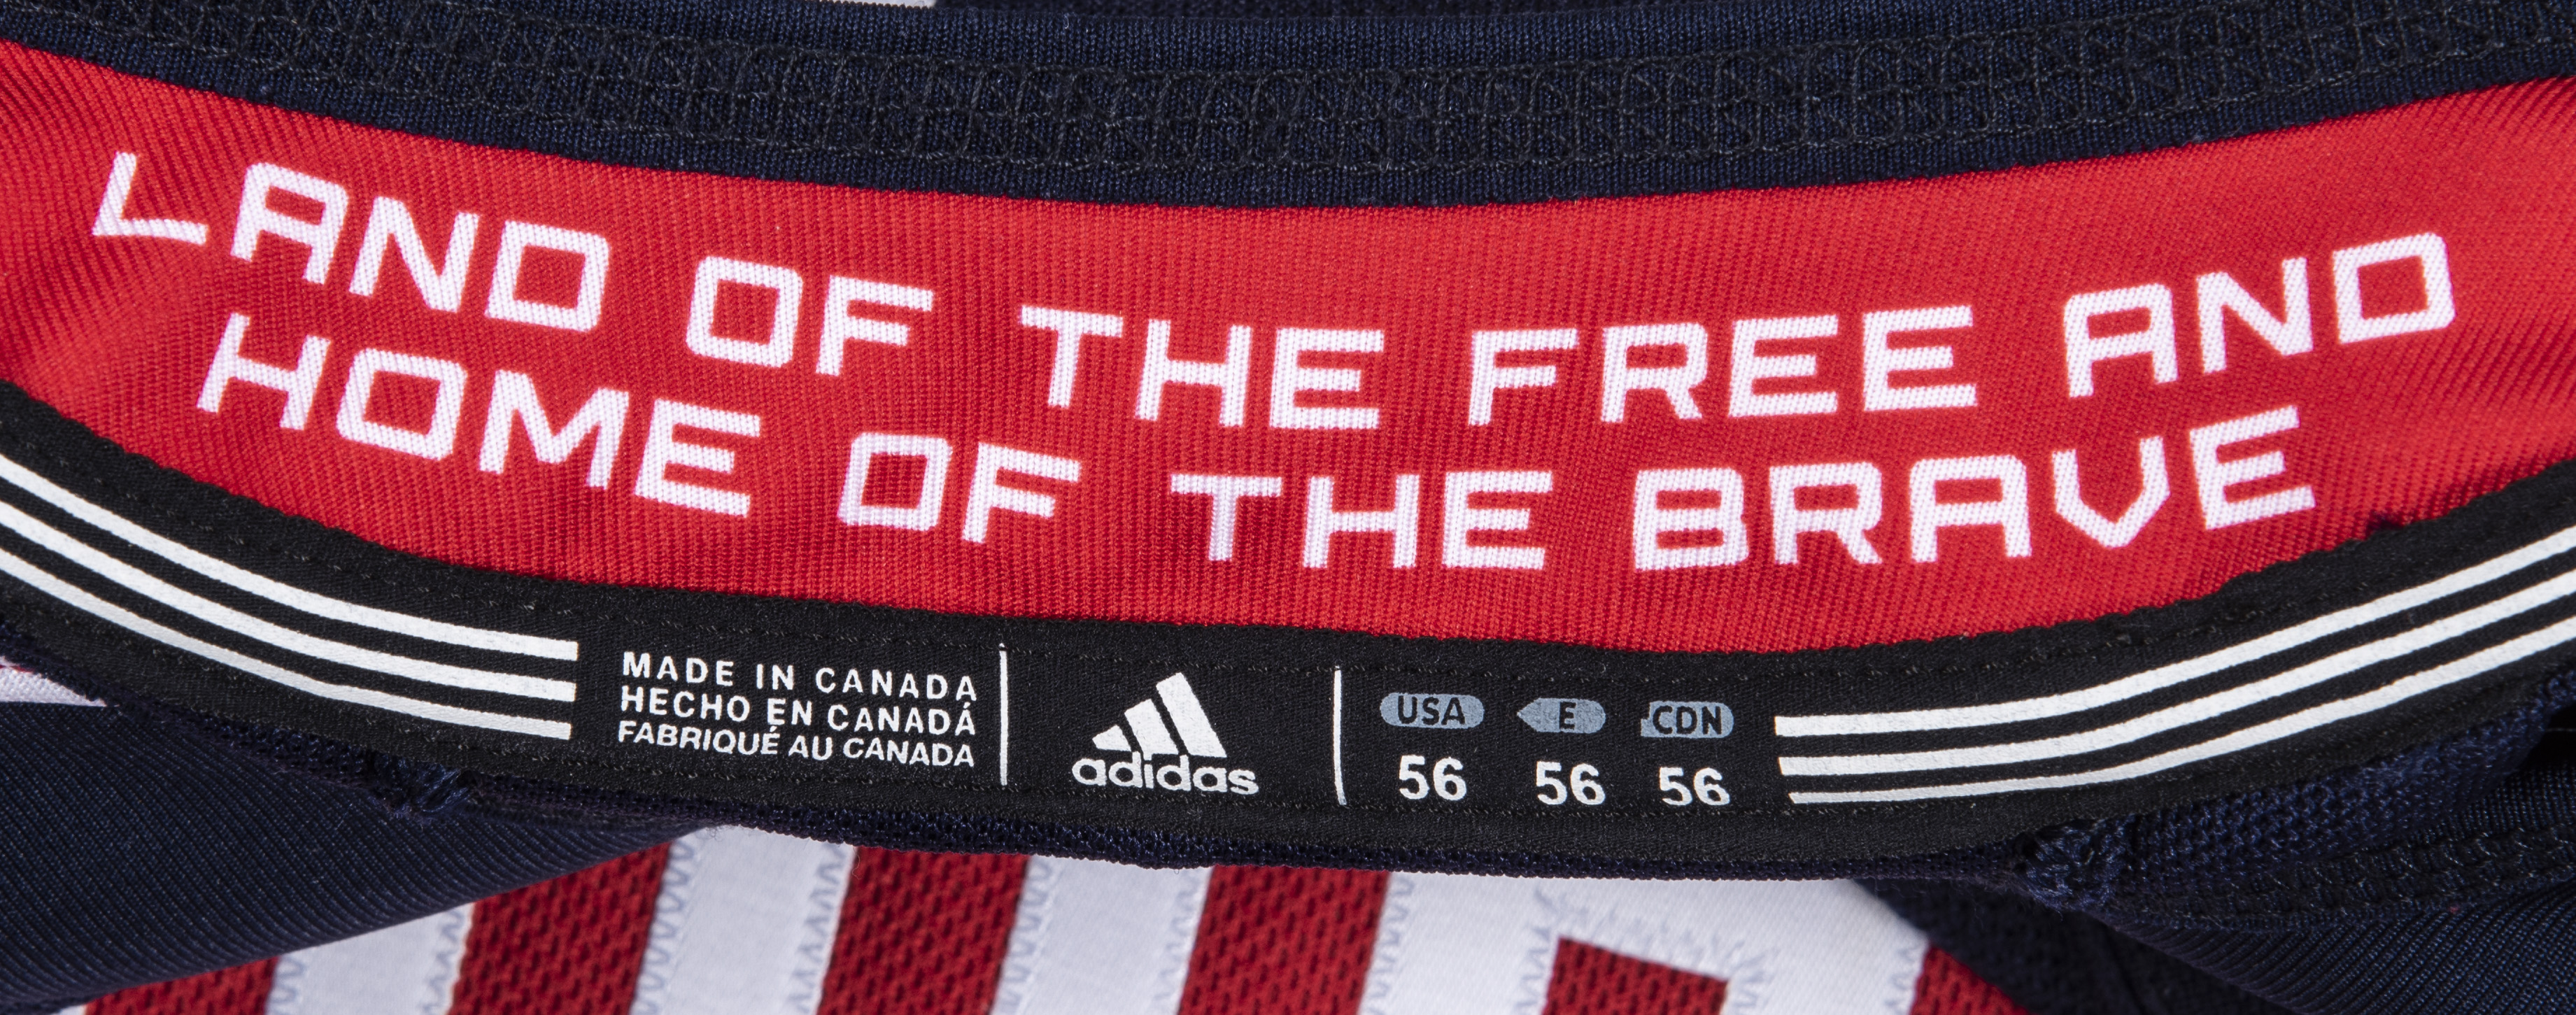 usa world cup scarf land of the free home of the brave